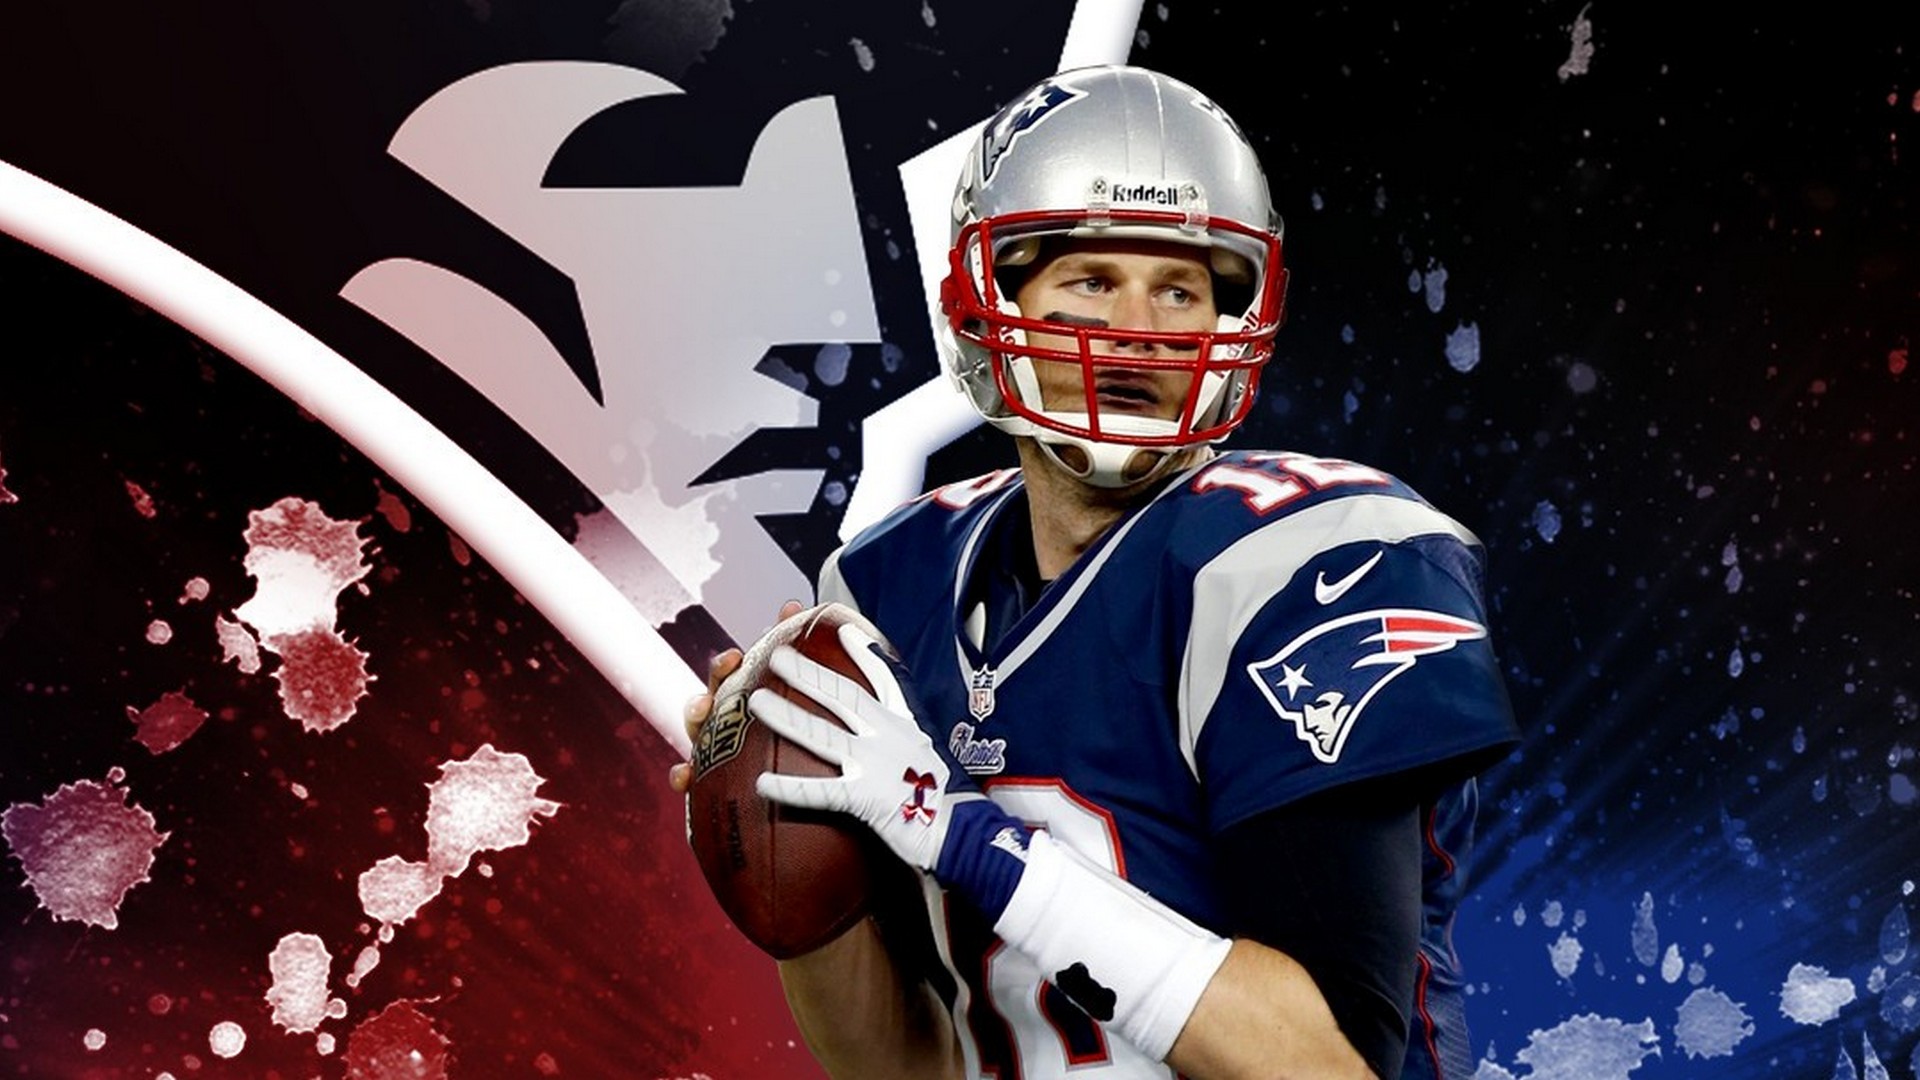 Wallpapers Computer Tom Brady Goat with image resolution 1920x1080 pixel. You can make this wallpaper for your Desktop Computer Backgrounds, Mac Wallpapers, Android Lock screen or iPhone Screensavers